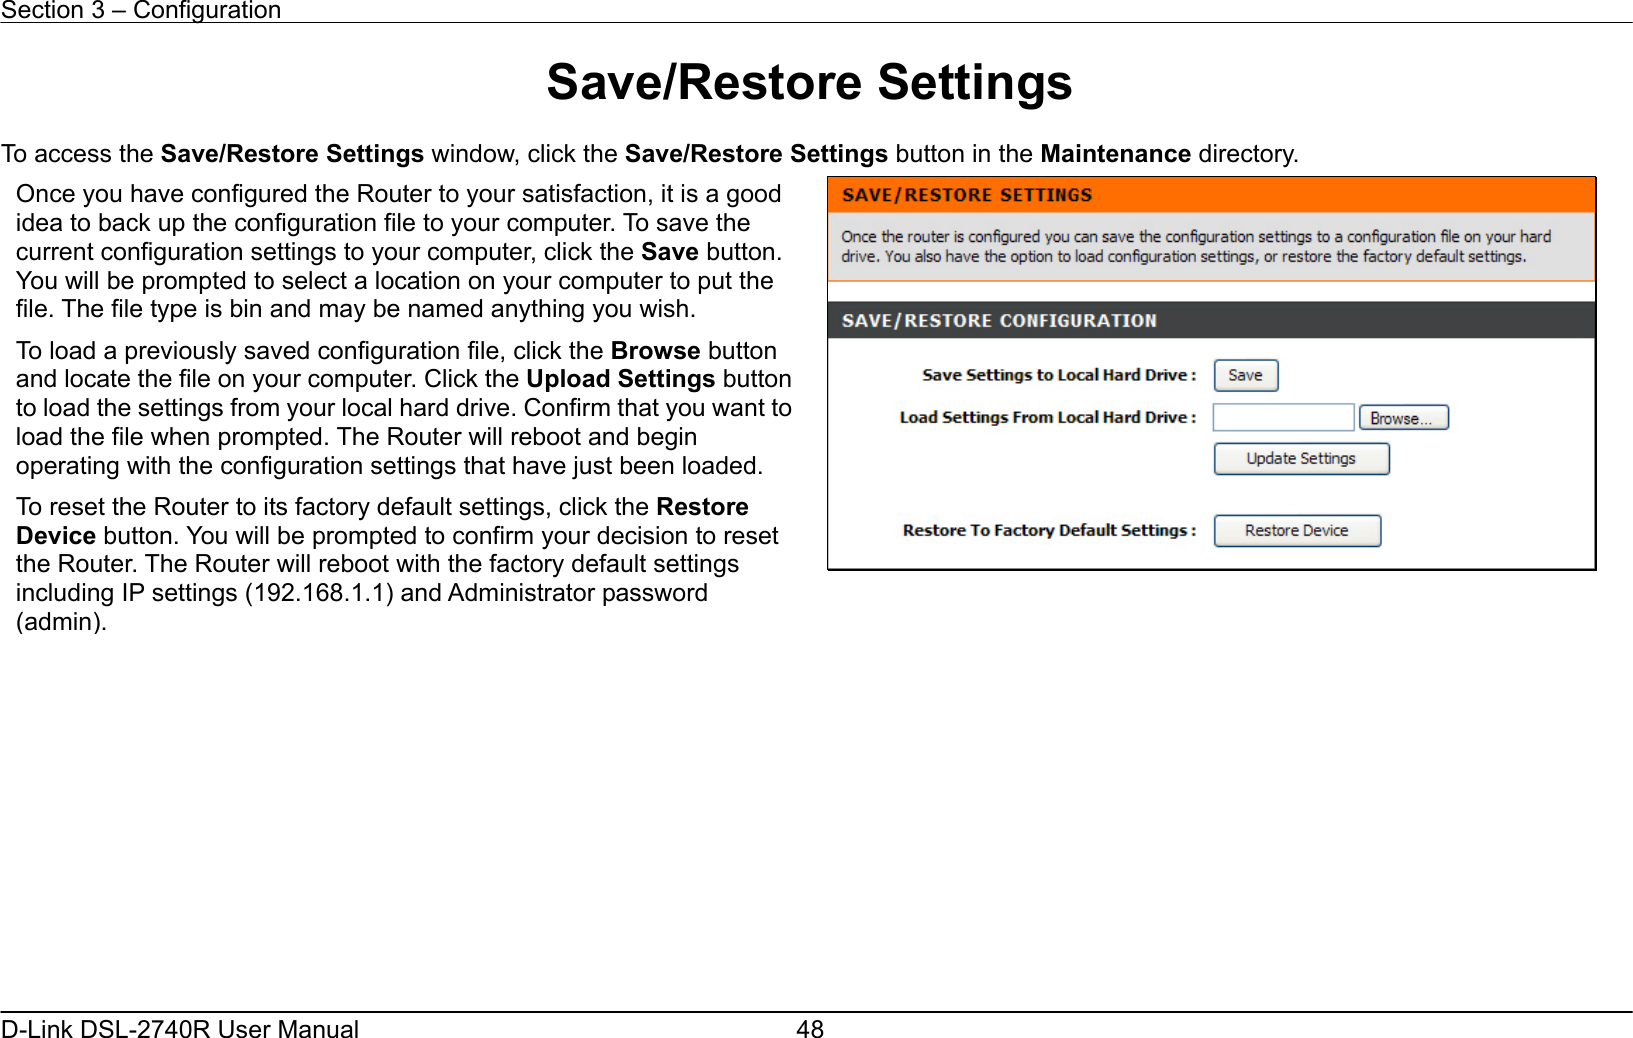 Section 3 – Configuration   D-Link DSL-2740R User Manual  48Save/Restore Settings  To access the Save/Restore Settings window, click the Save/Restore Settings button in the Maintenance directory.                 Once you have configured the Router to your satisfaction, it is a good idea to back up the configuration file to your computer. To save the current configuration settings to your computer, click the Save button. You will be prompted to select a location on your computer to put the file. The file type is bin and may be named anything you wish.   To load a previously saved configuration file, click the Browse button and locate the file on your computer. Click the Upload Settings button to load the settings from your local hard drive. Confirm that you want to load the file when prompted. The Router will reboot and begin operating with the configuration settings that have just been loaded. To reset the Router to its factory default settings, click the Restore Device button. You will be prompted to confirm your decision to reset the Router. The Router will reboot with the factory default settings including IP settings (192.168.1.1) and Administrator password (admin). 